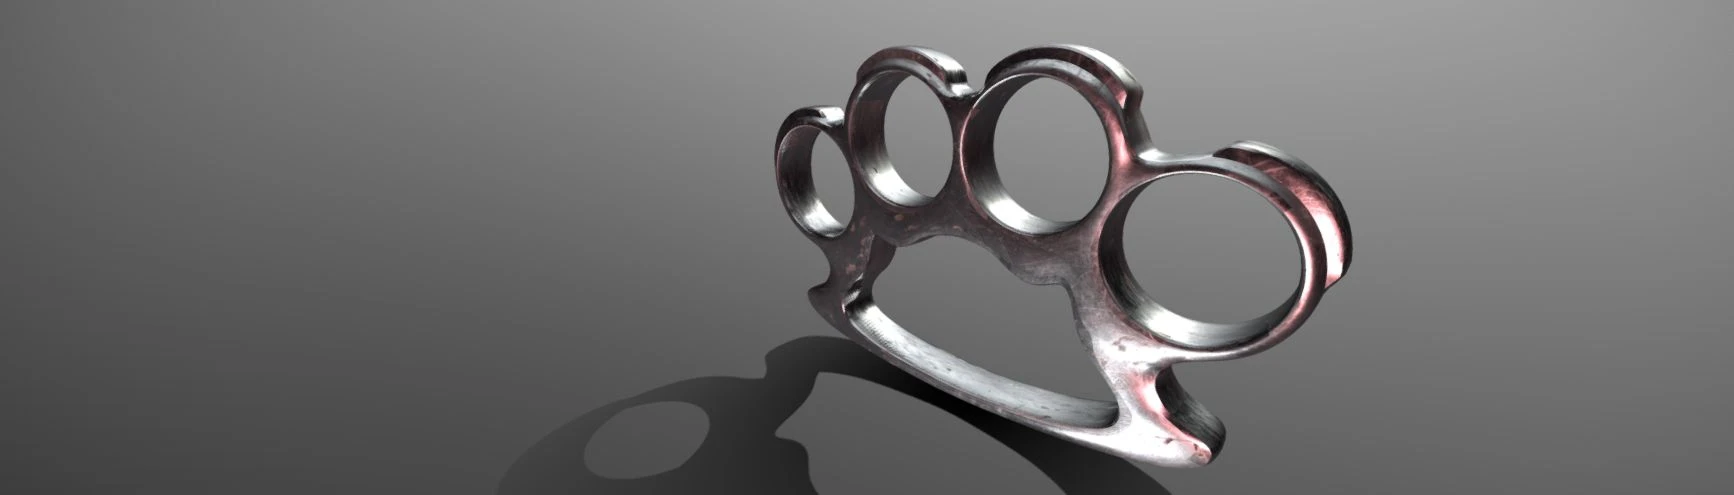 Brass Knuckles and such - Onyx Path Forums